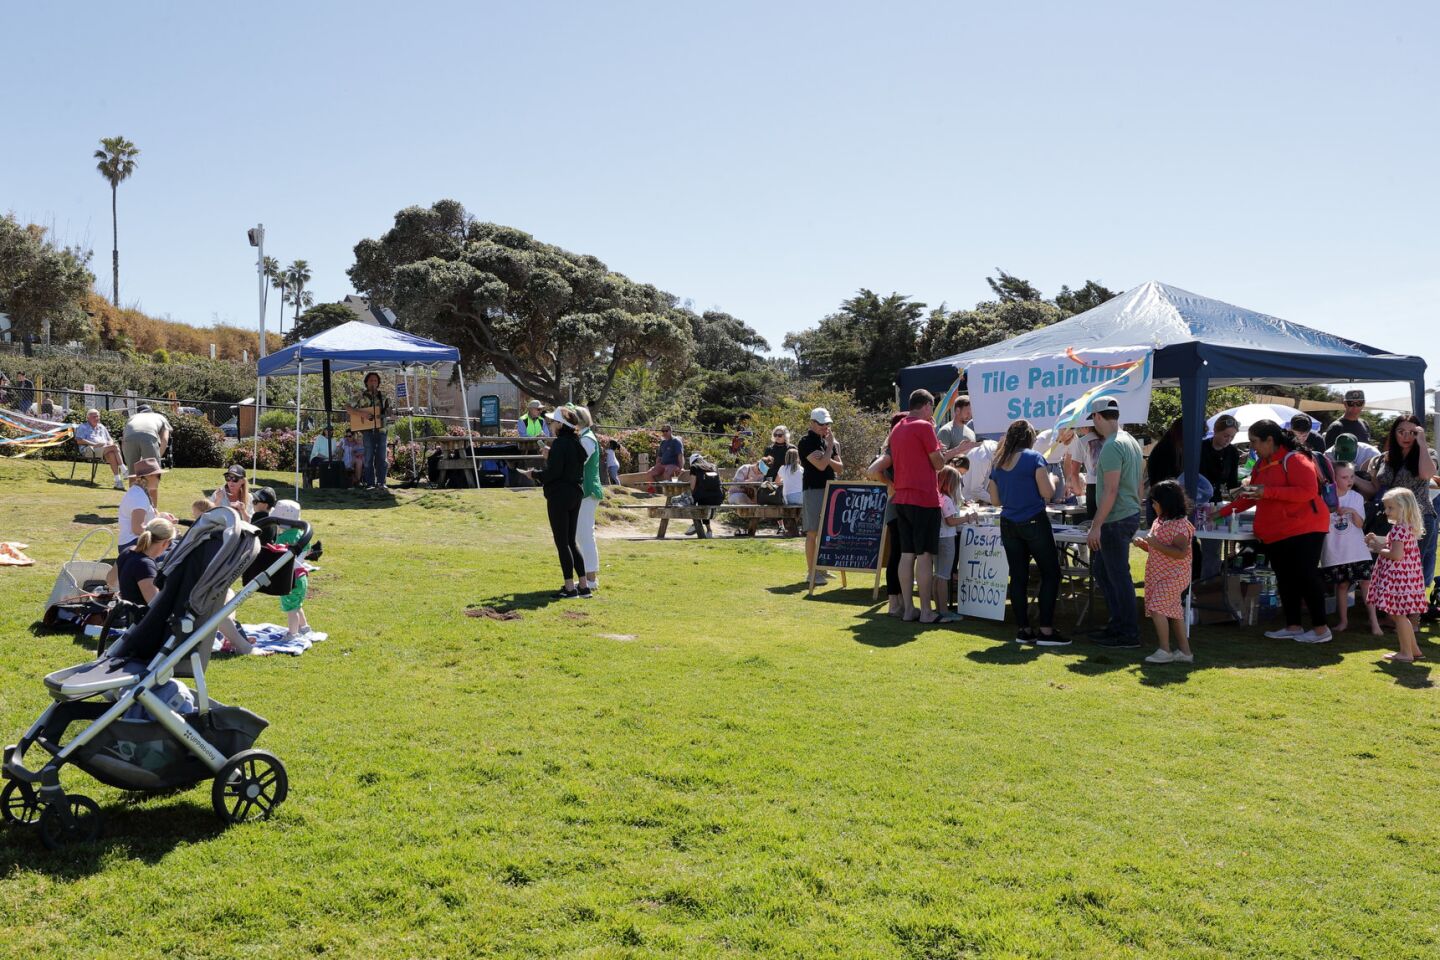 A family day of fun, crafts, and entertainment at the Del Mar Tot Lot